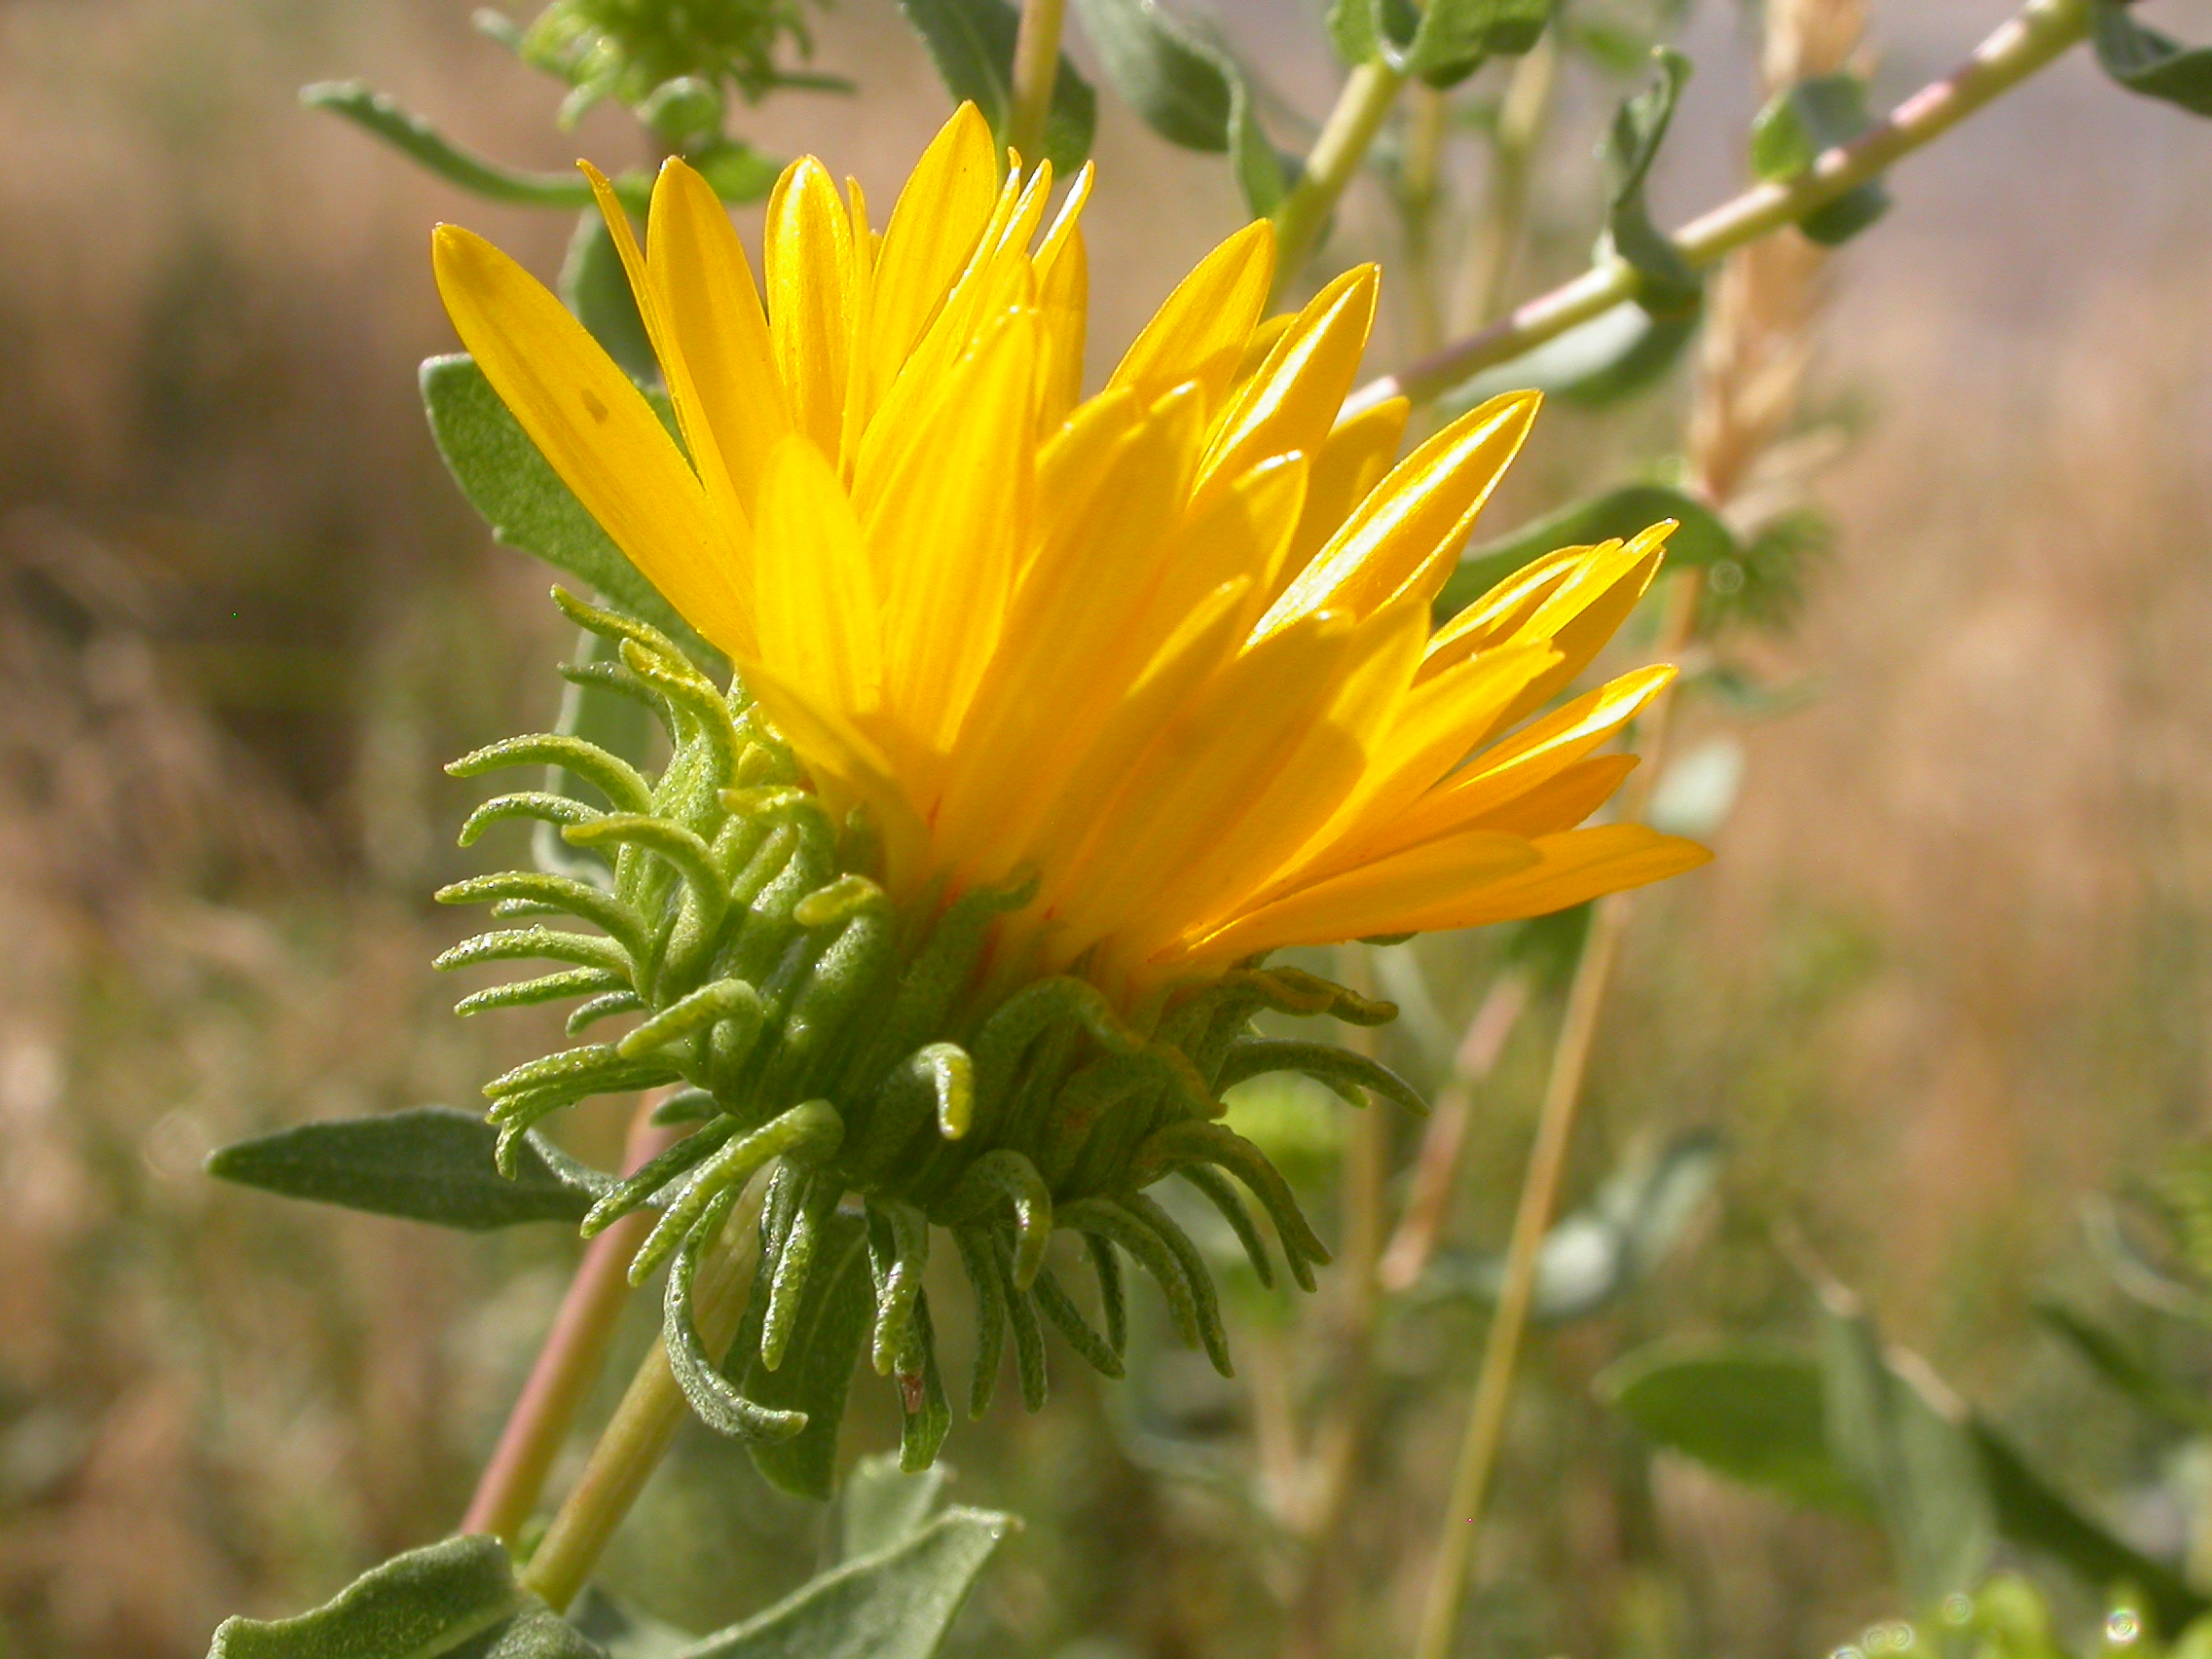 Side view of a flower, showing involucral bracts surrounding the entire base of the flower